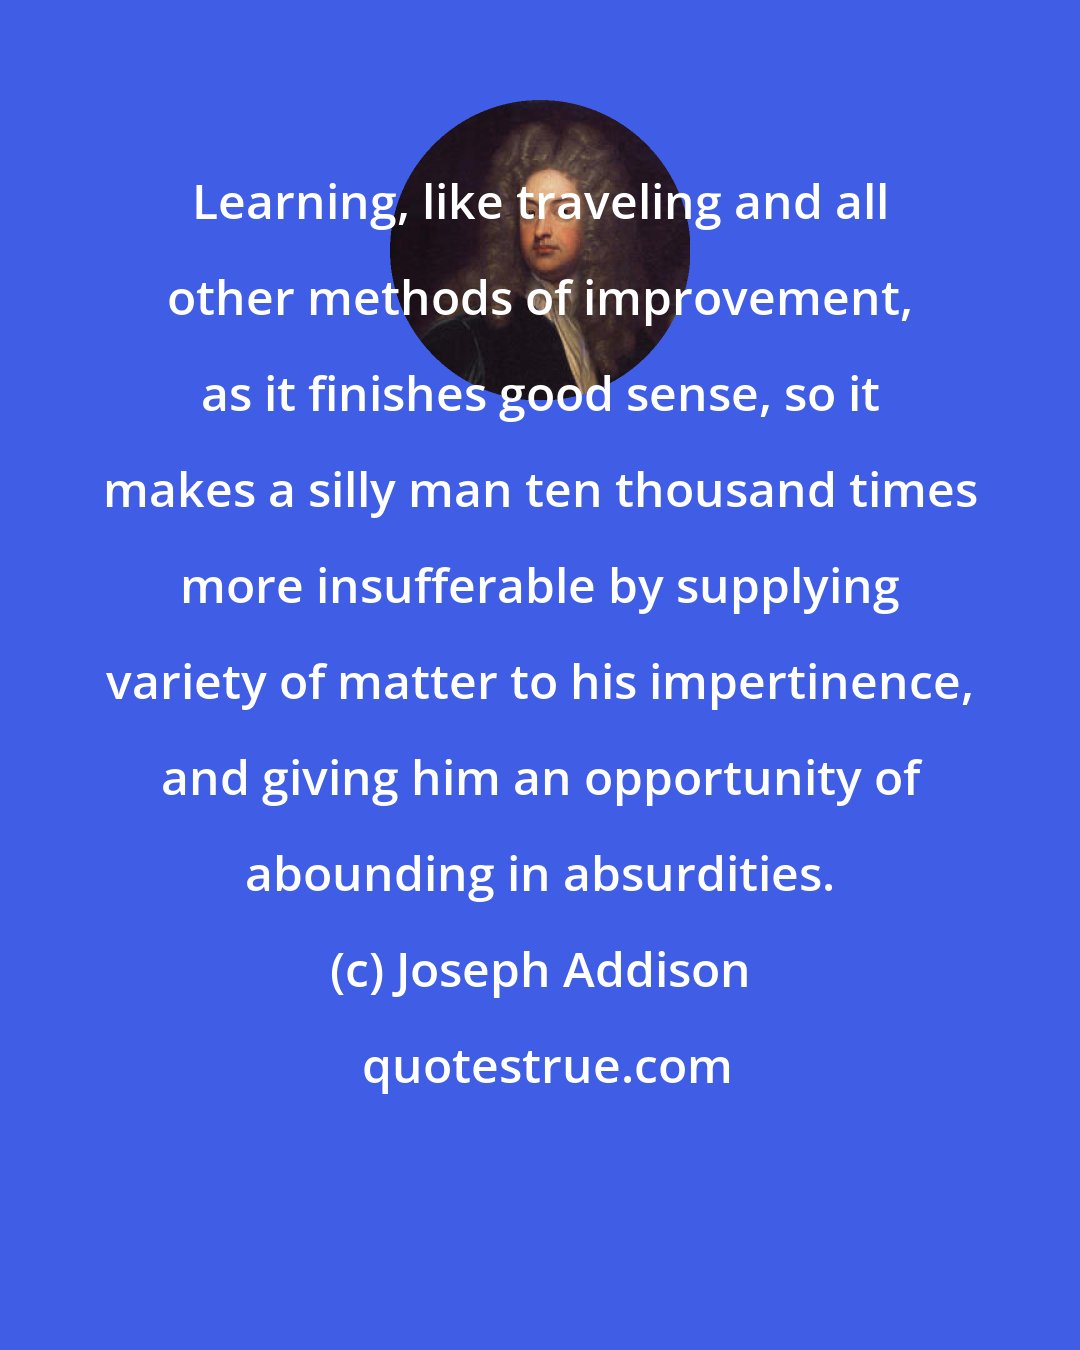 Joseph Addison: Learning, like traveling and all other methods of improvement, as it finishes good sense, so it makes a silly man ten thousand times more insufferable by supplying variety of matter to his impertinence, and giving him an opportunity of abounding in absurdities.